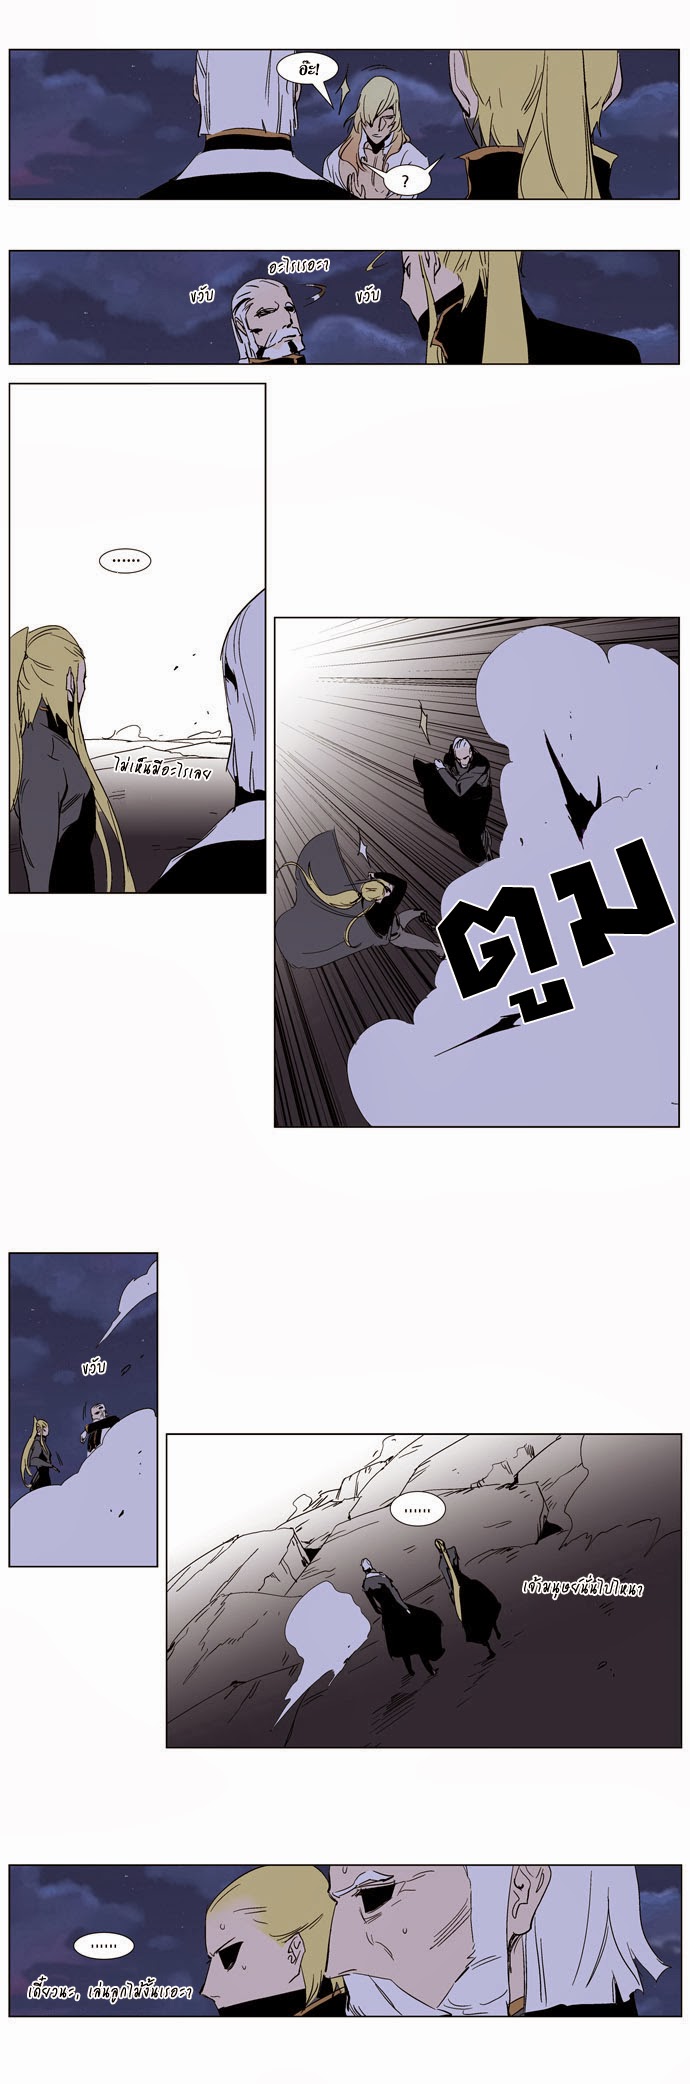 Noblesse 243 017